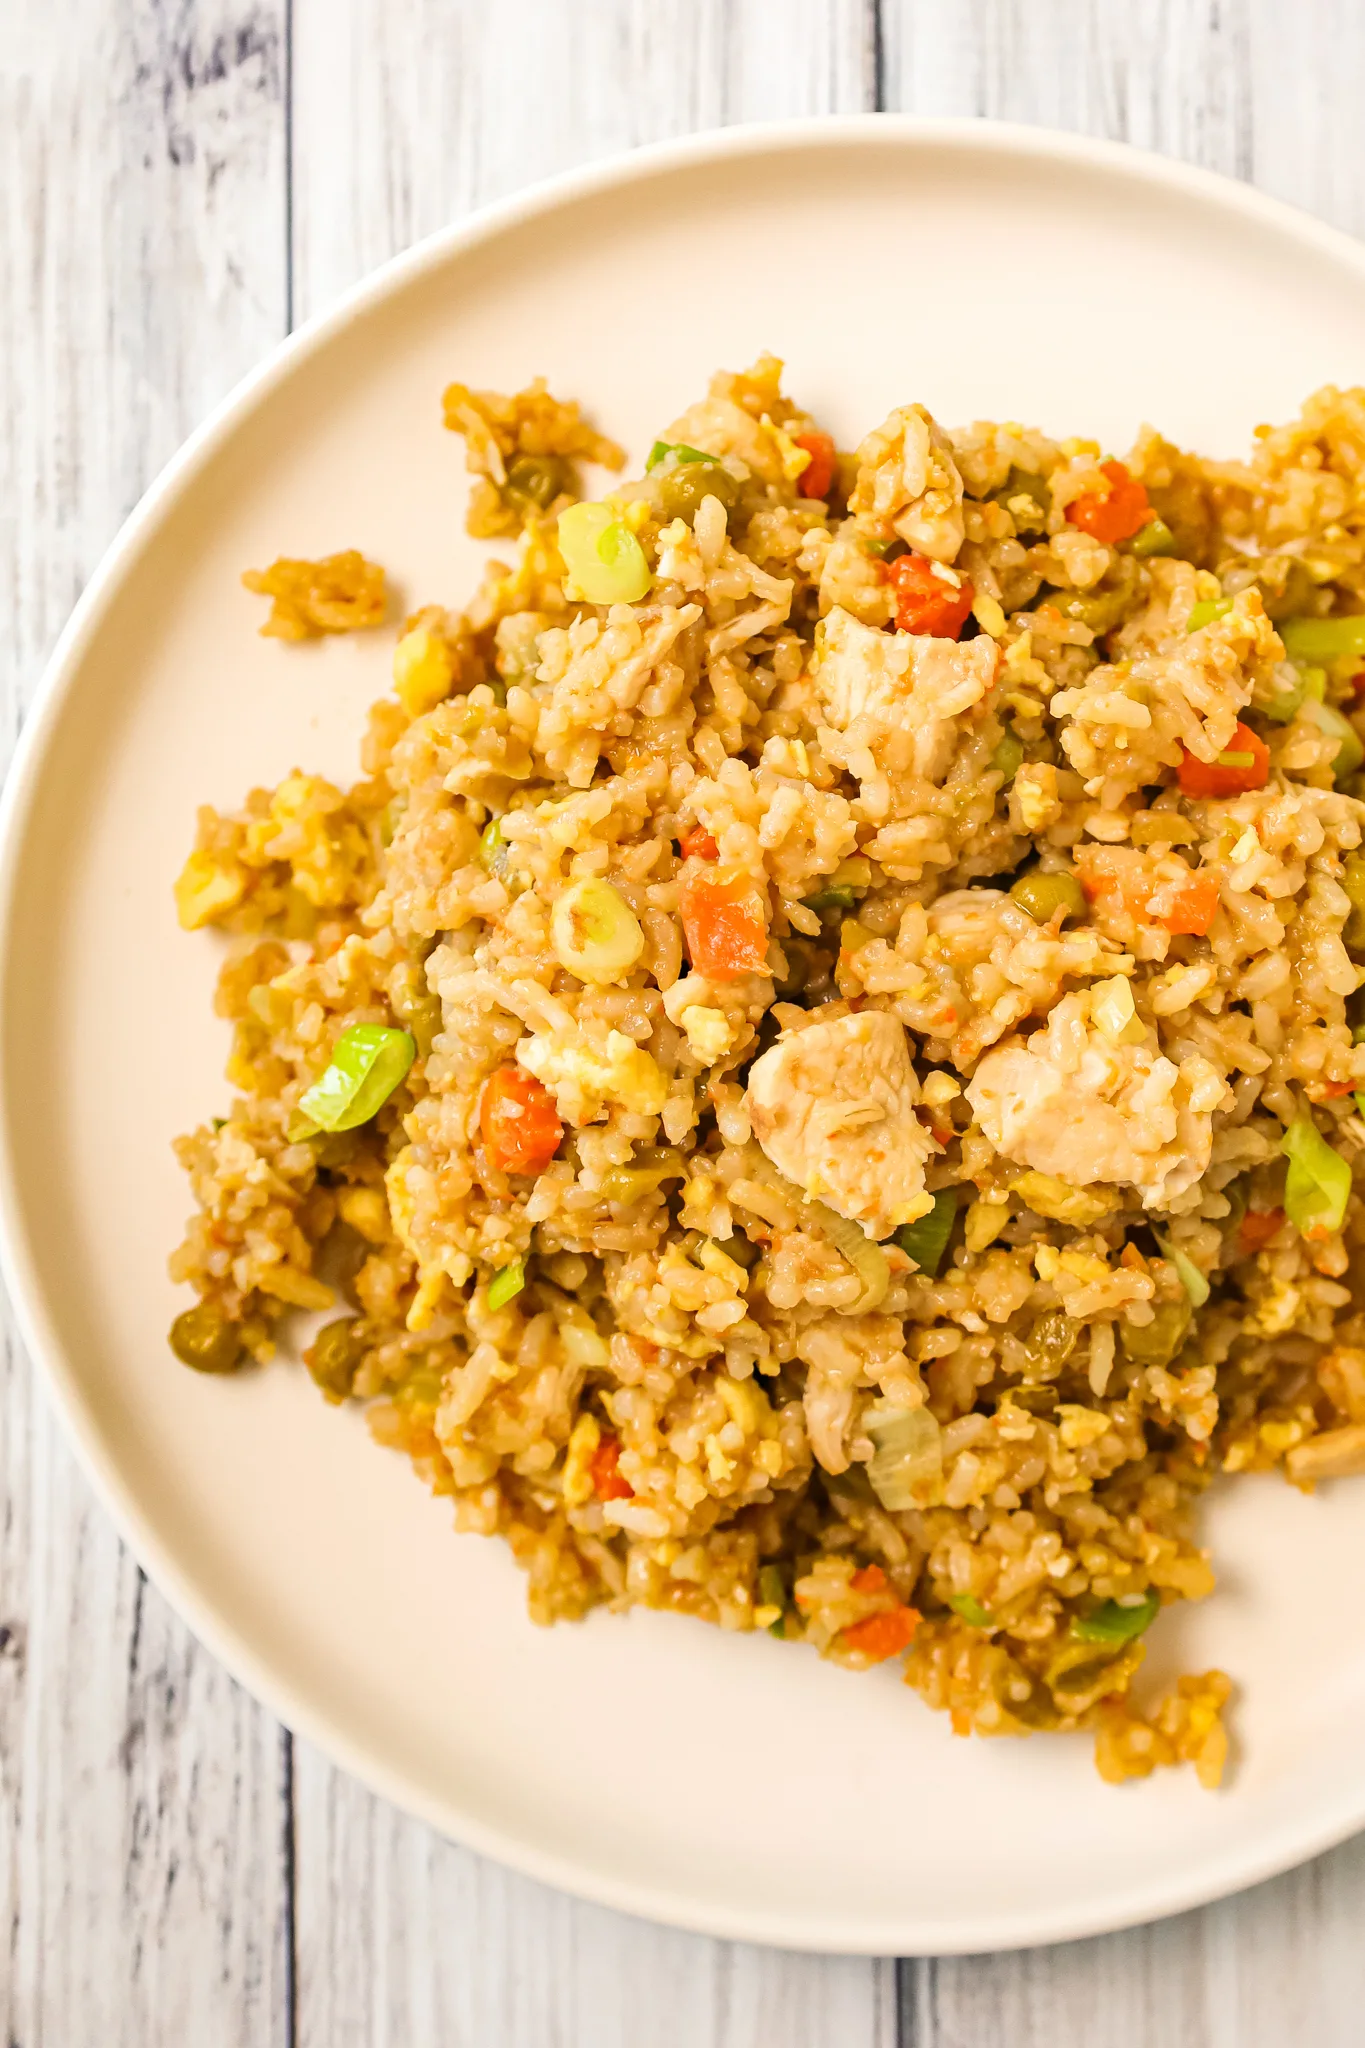 Instant Pot Chicken Fried Rice is an easy pressure cooker dinner recipe made with long grain white rice, boneless skinless chicken breasts, scrambled eggs and peas and carrots all seasoned with chicken broth, soy sauce and toasted sesame oil.